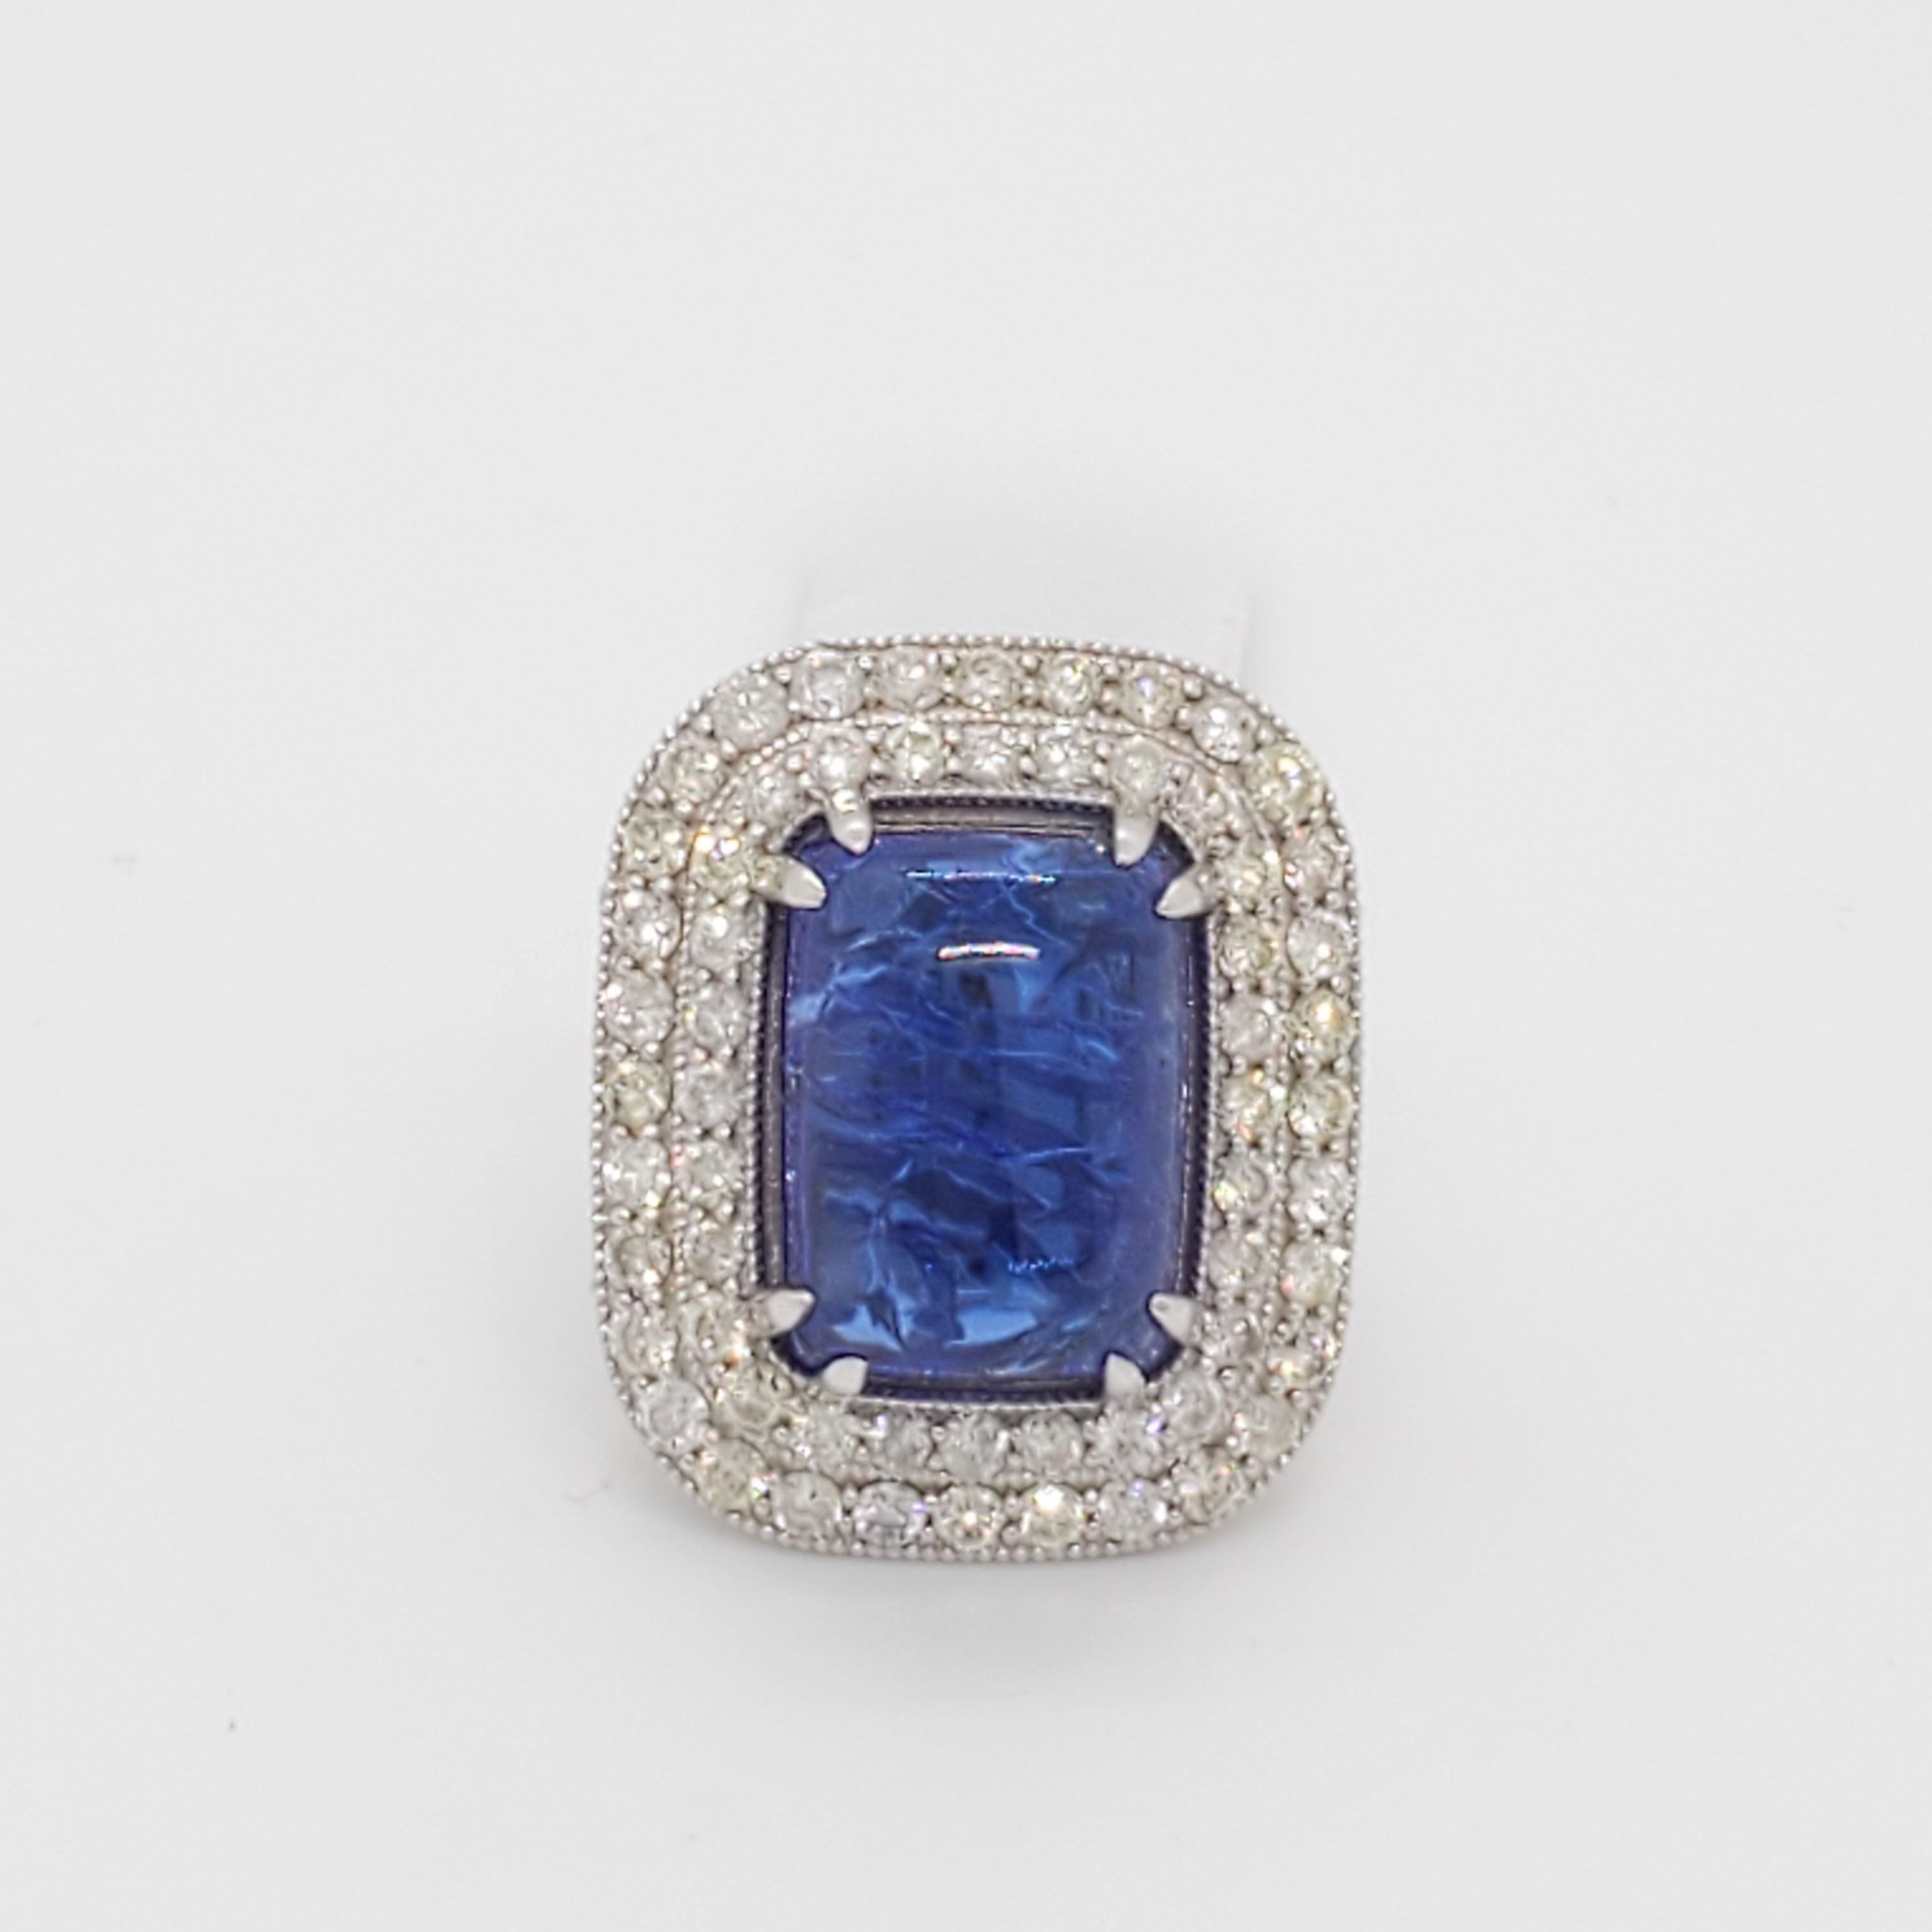 Gorgeous big size tanzanite rectangular cabochon with good quality white diamond rounds.  Handmade in 18k white gold.  This ring was bought in a large lot so accurate weights are unknown but close approximation can be given in message.  Ring size